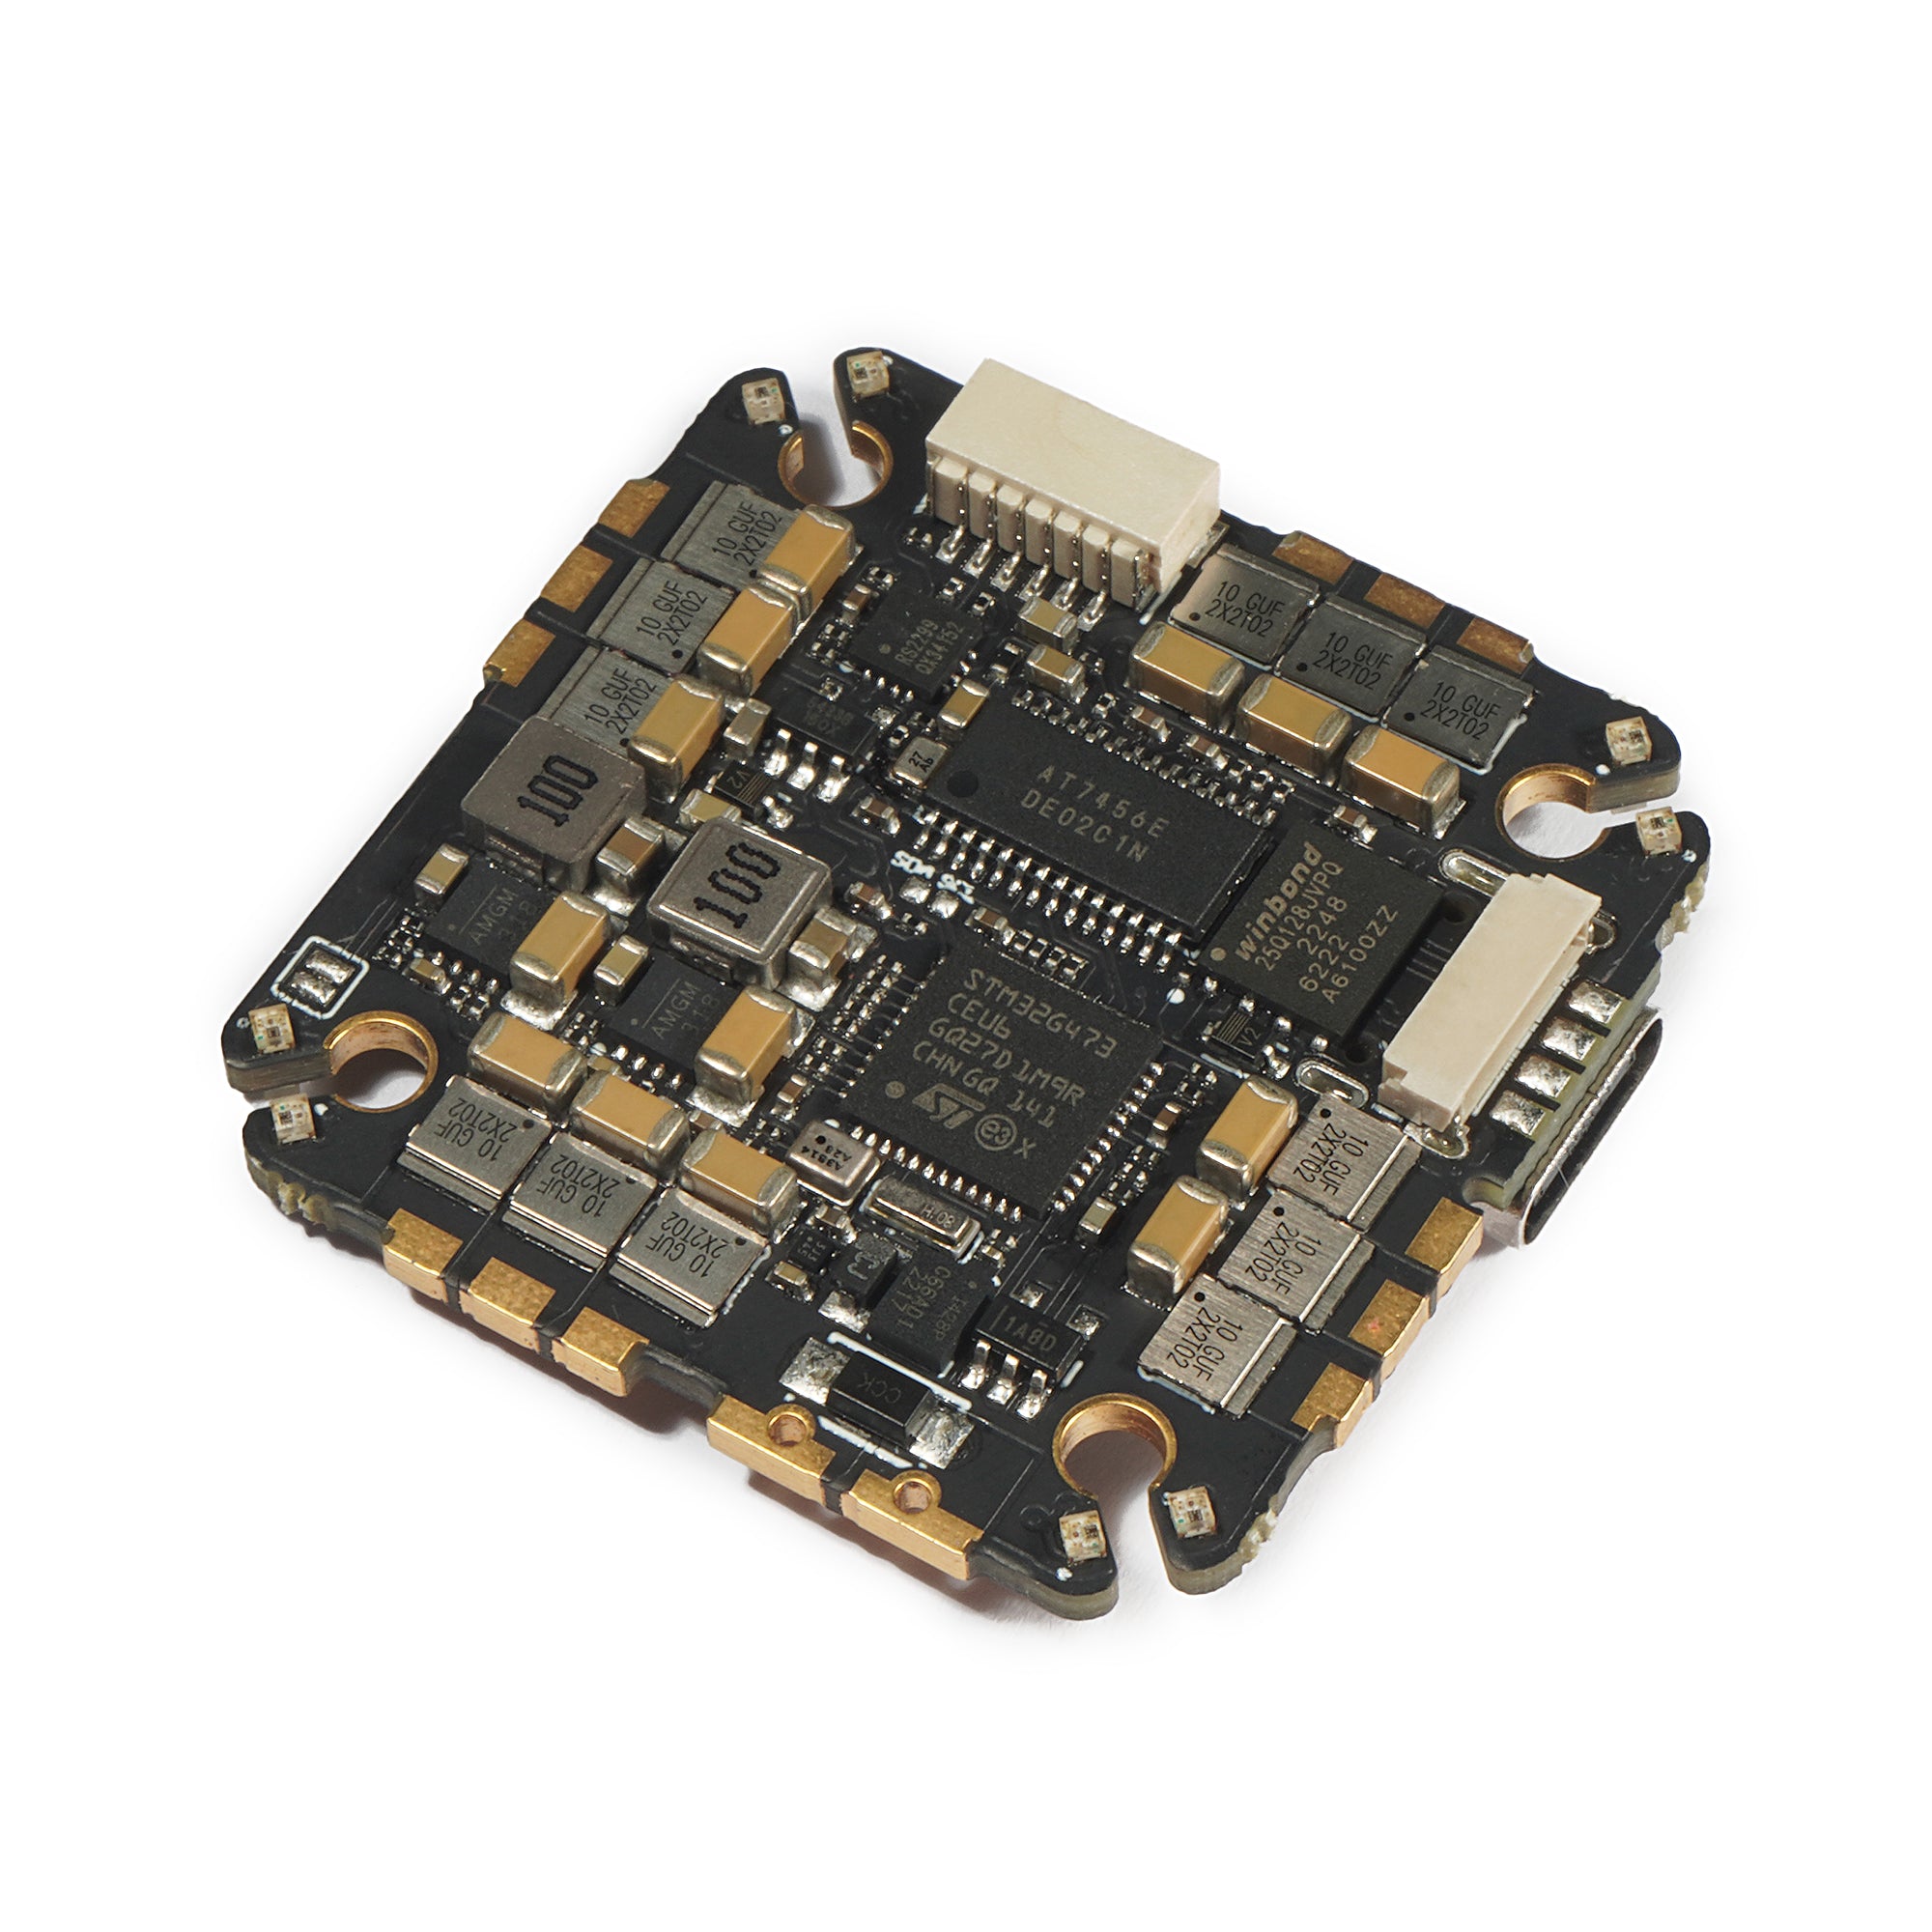 Airbot Fenix G4 4-6S AIO Toothpick/Whoop  ICM42688-P Flight Controller (w/ 35A 32Bit AM32 4in1 ESC)